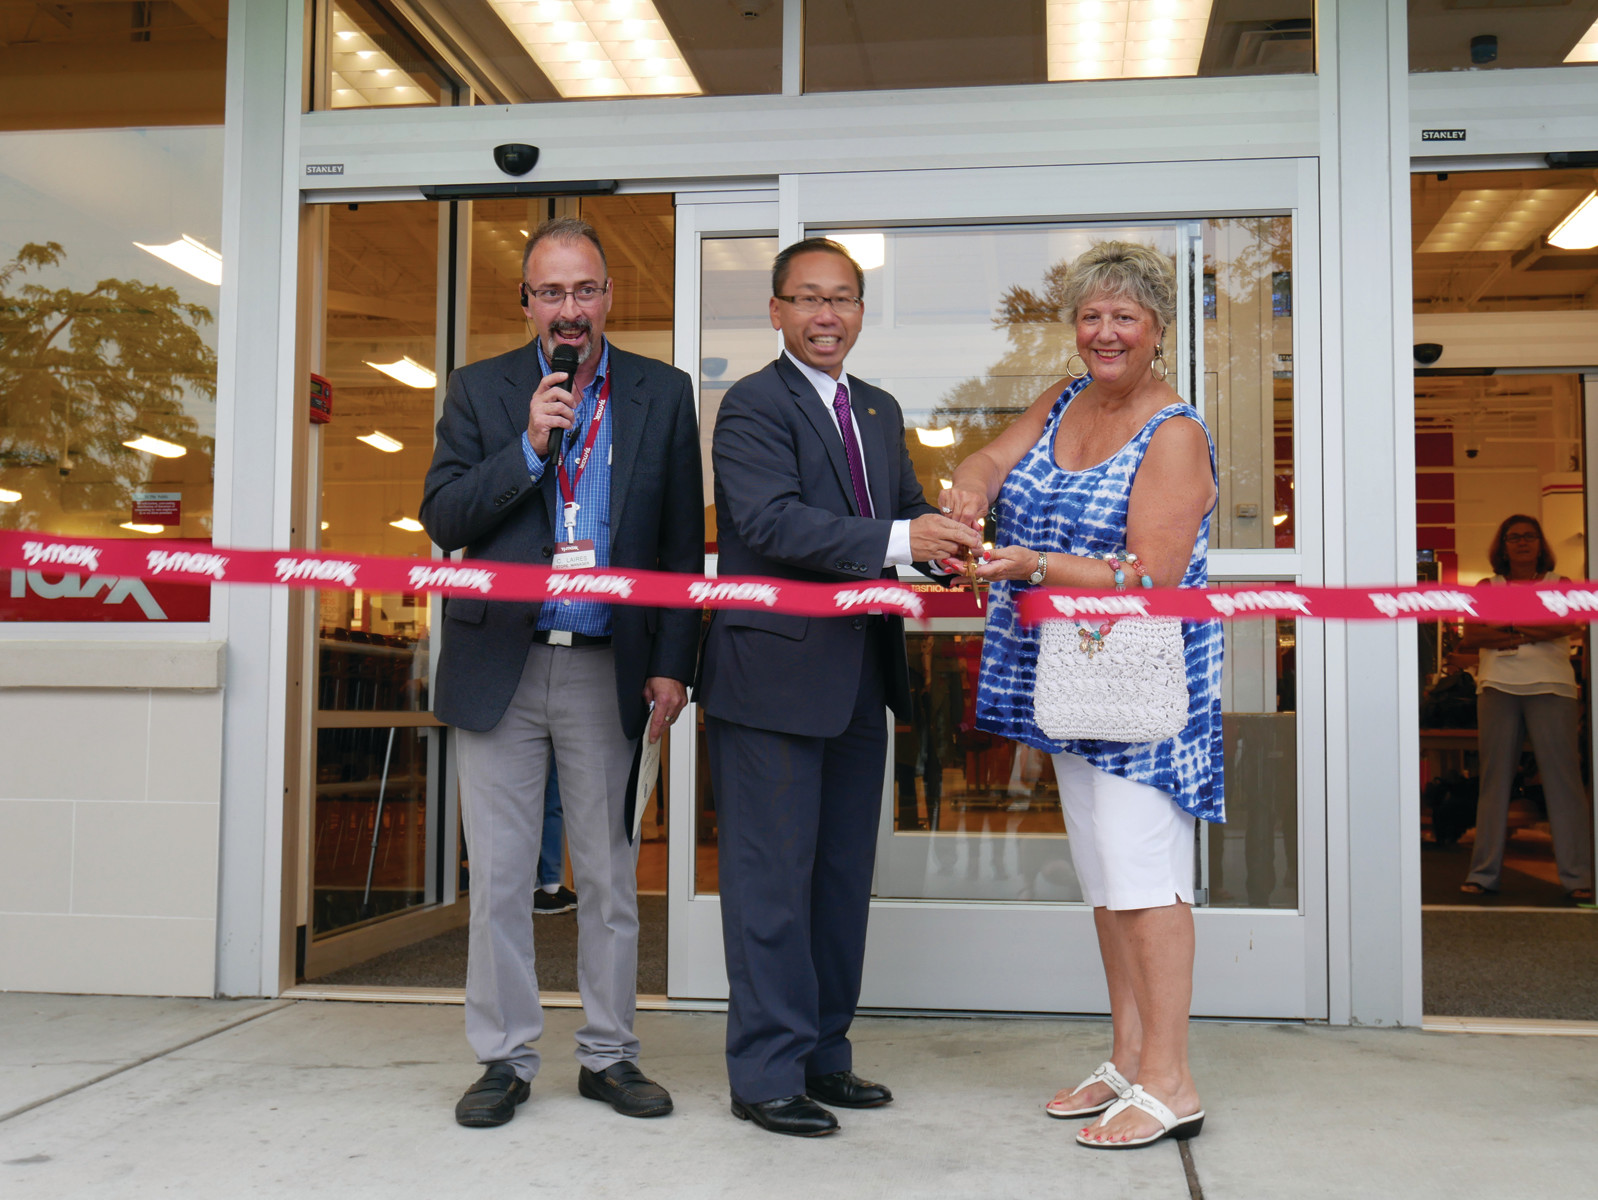 Store manager Carlos Laires, Cranston Mayor Allan Fung, and Sue Rotella, the first shopper in line to enter the store, cut the ribbon opening the new T.J. Maxx in Chapel View Mall in Cranston.